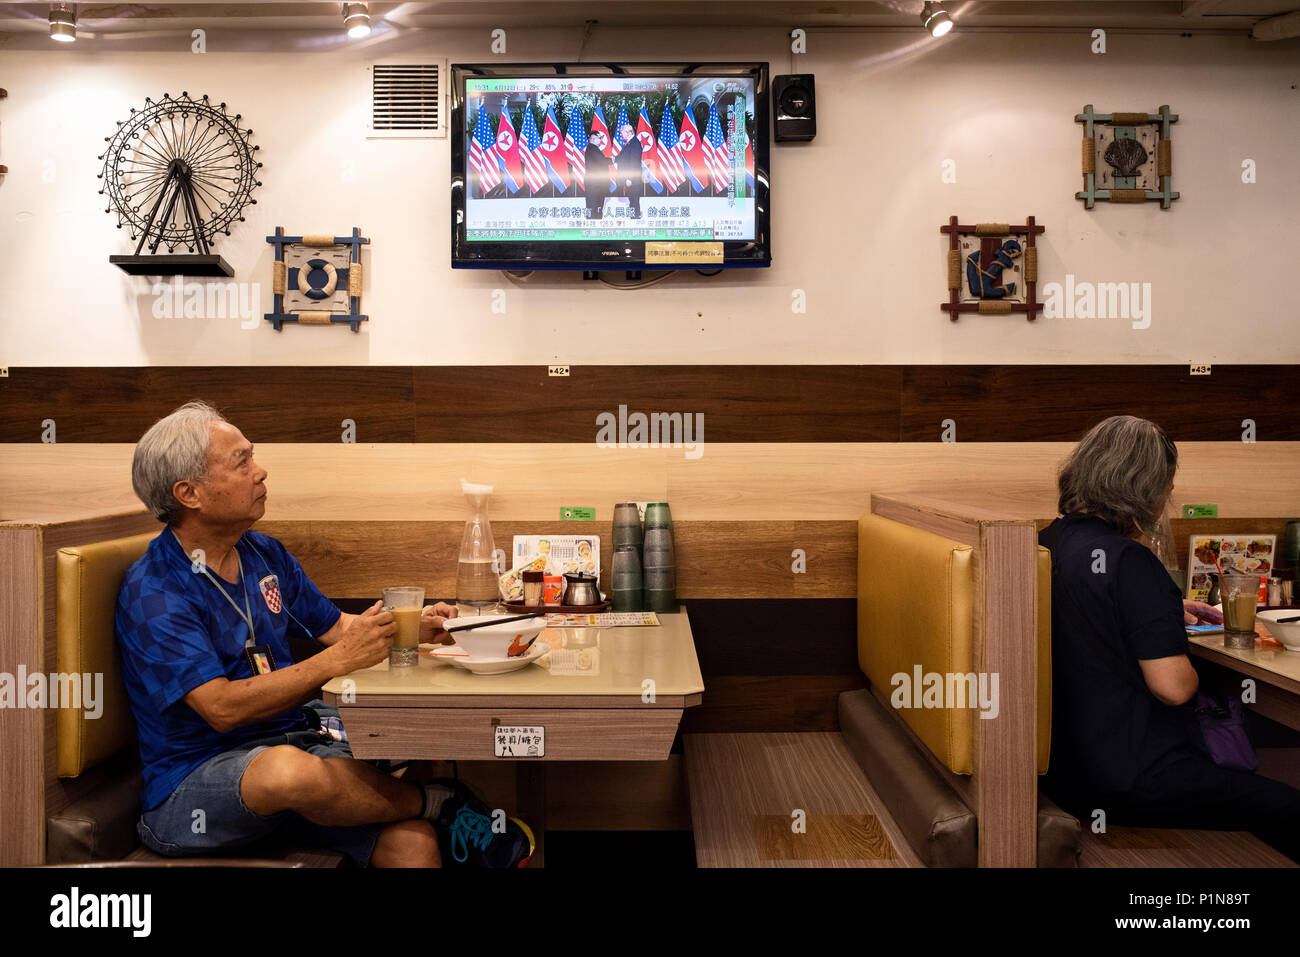 At a local restaurant in Hong Kong, a local watches a TV screen showing the historic moment when US President Donald Trump and North Korea leader Kim Jong-un meet for the first time during the Singapore peace-keeping and denuclearisation Summit. Stock Photo